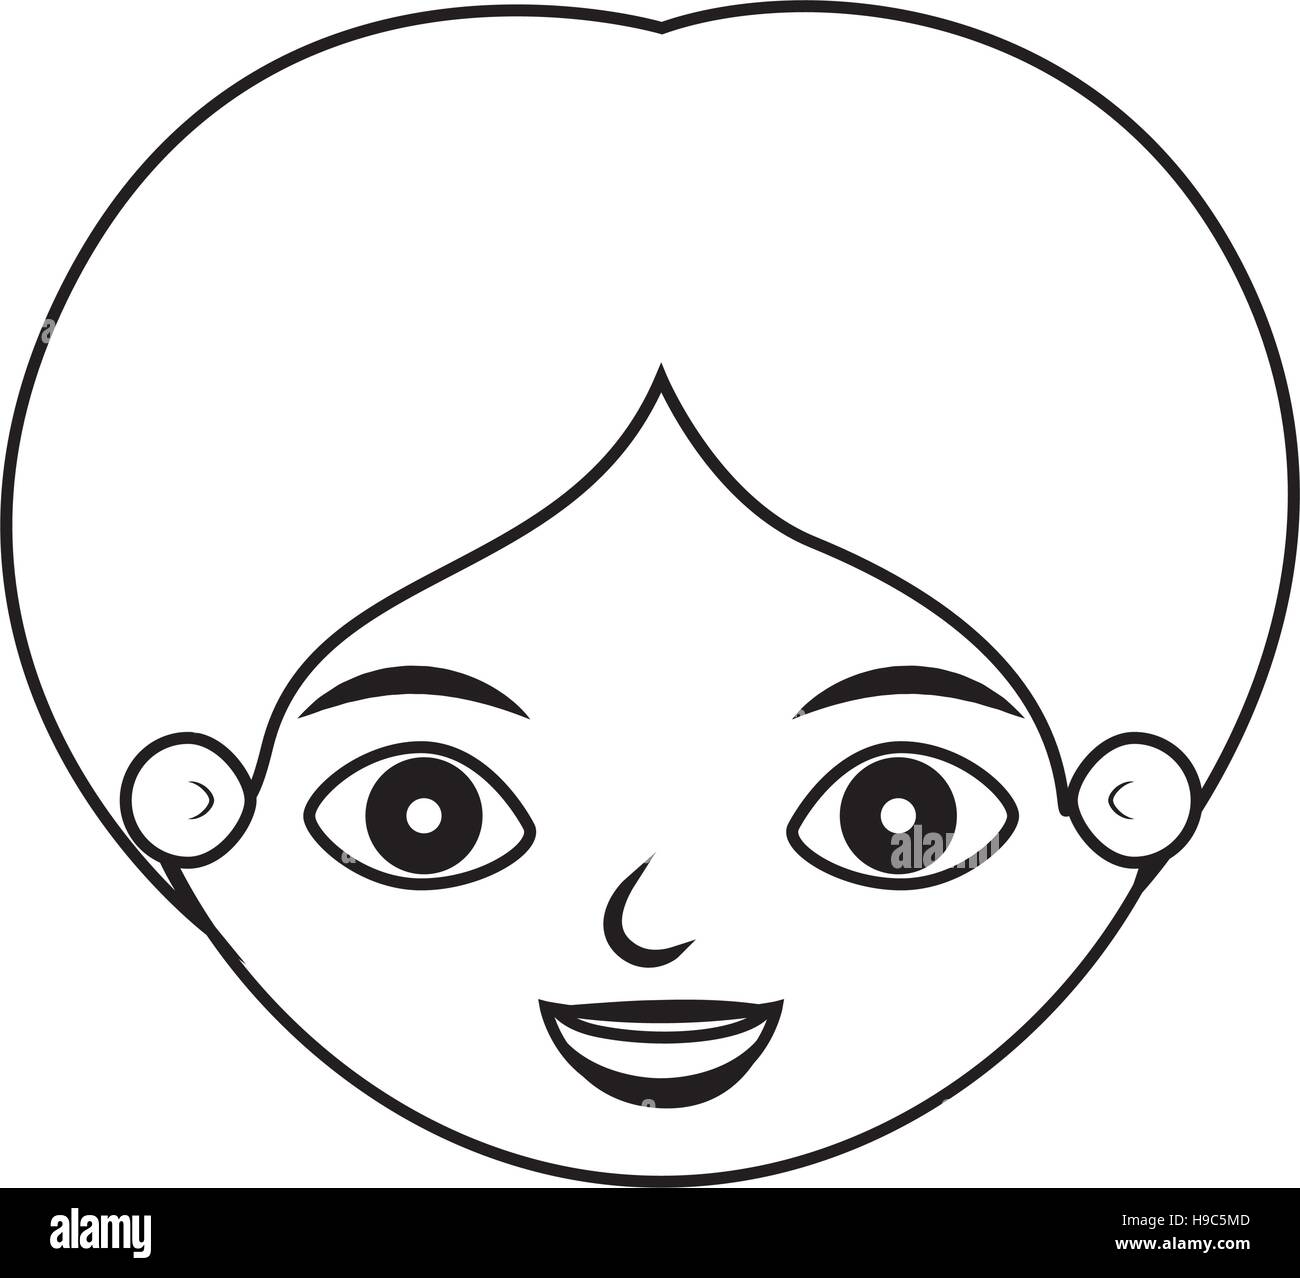 front face kid silhouette smiling vector illustration Stock Vector